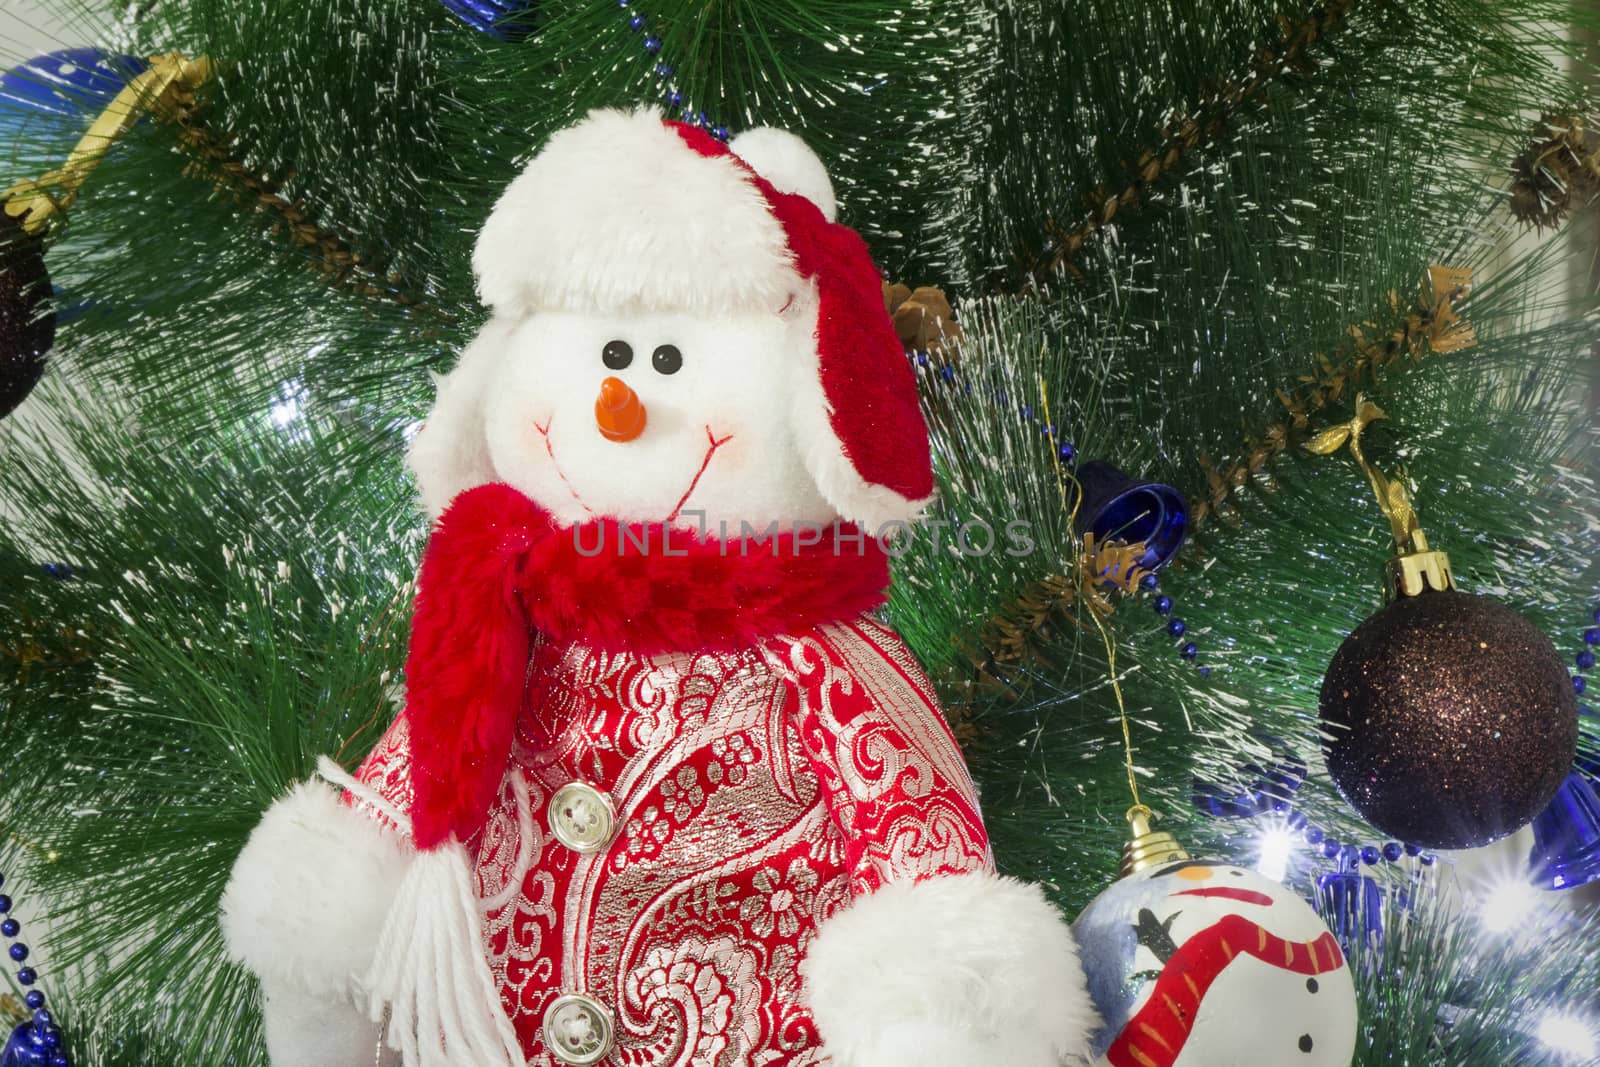 Snowman in a red cap and elegant clothes against the decorated Christmas fir-tree